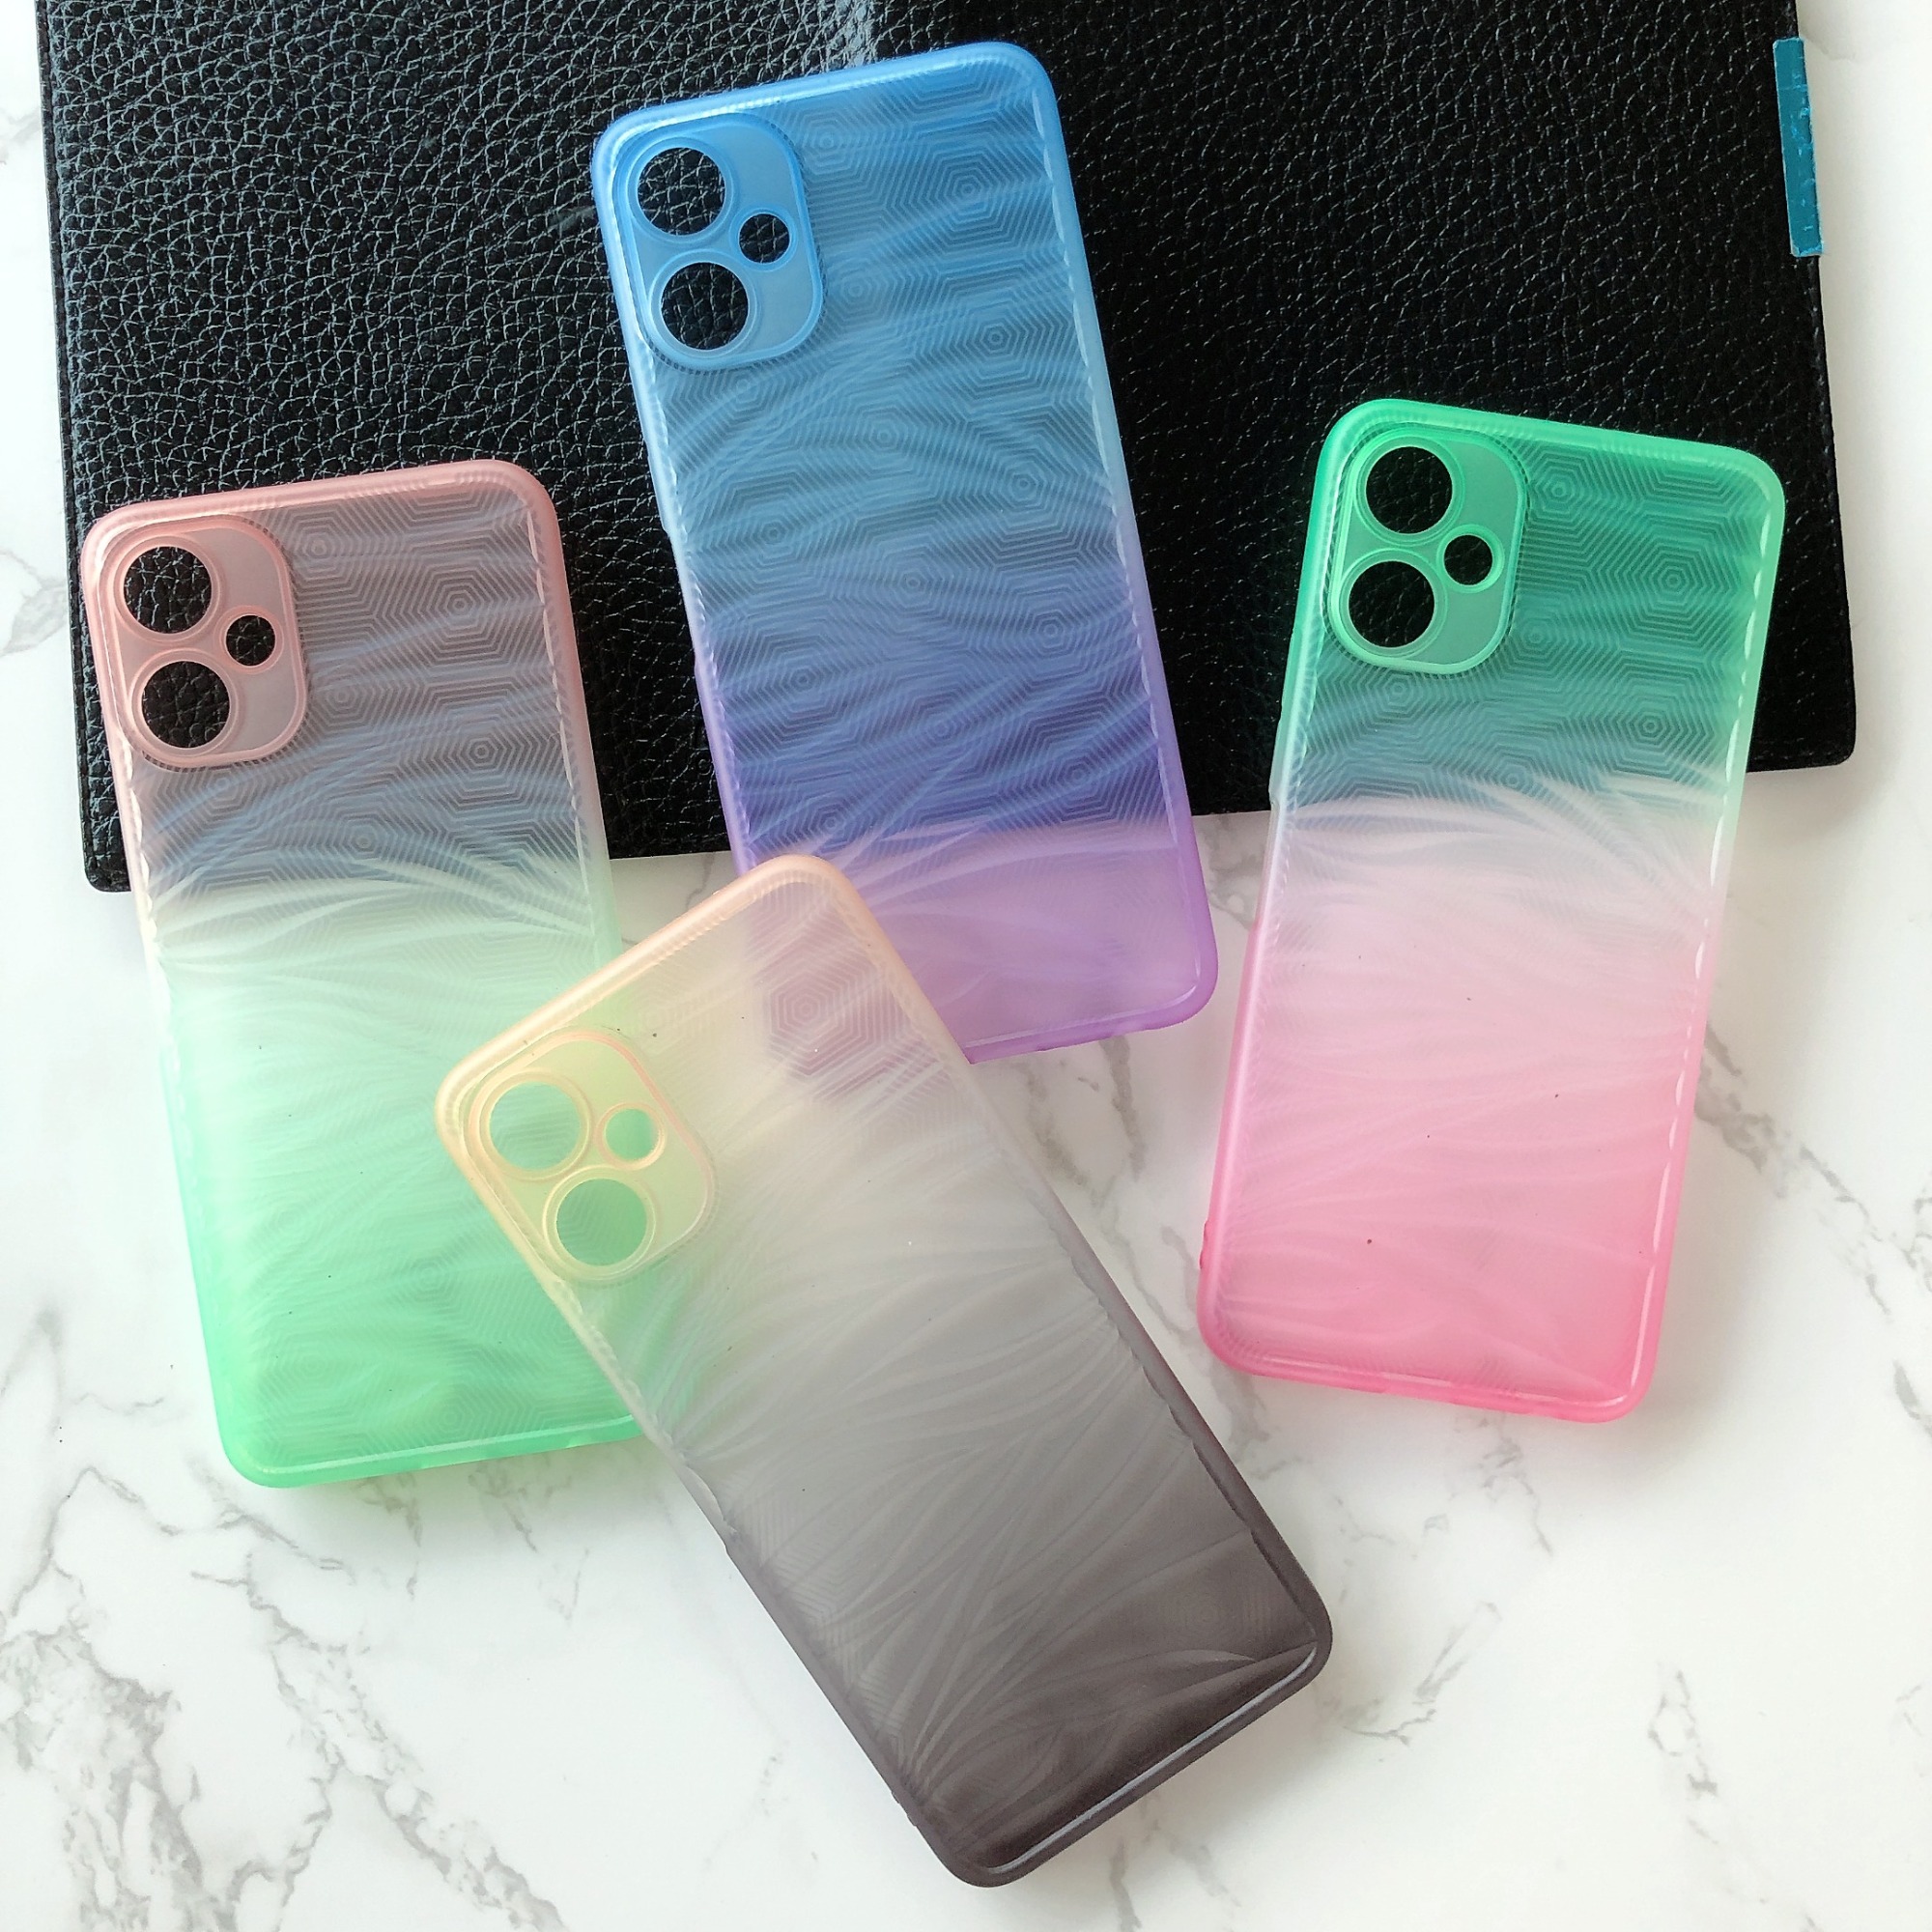 New fashion and good quality gradient color ripple silicone phone case for SAM A53 5G A23 A03 CORE